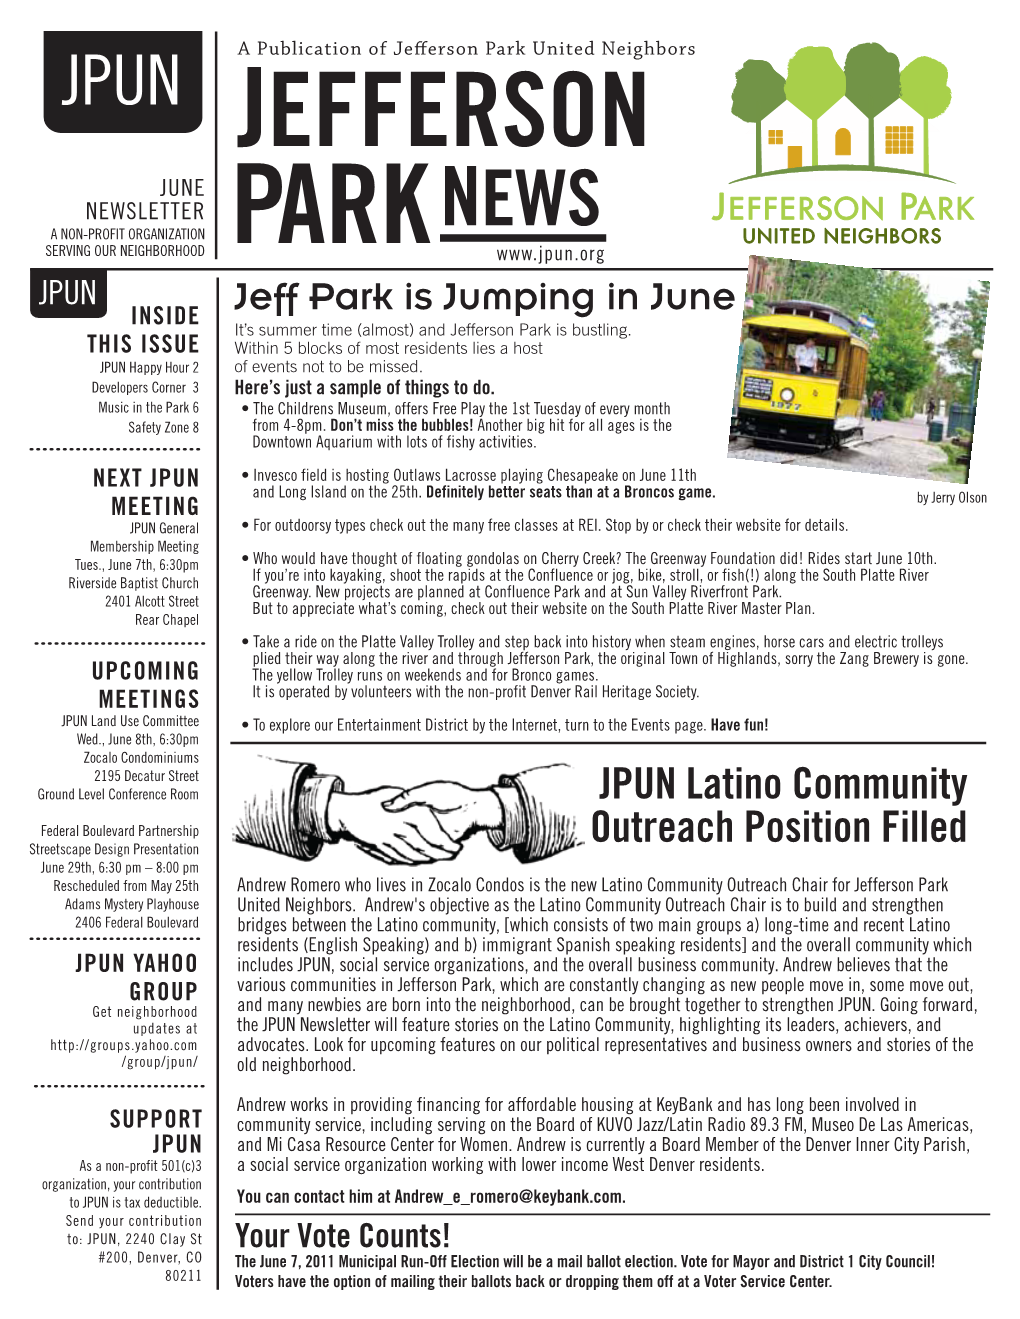 JPUN Latino Community Outreach Position Filled